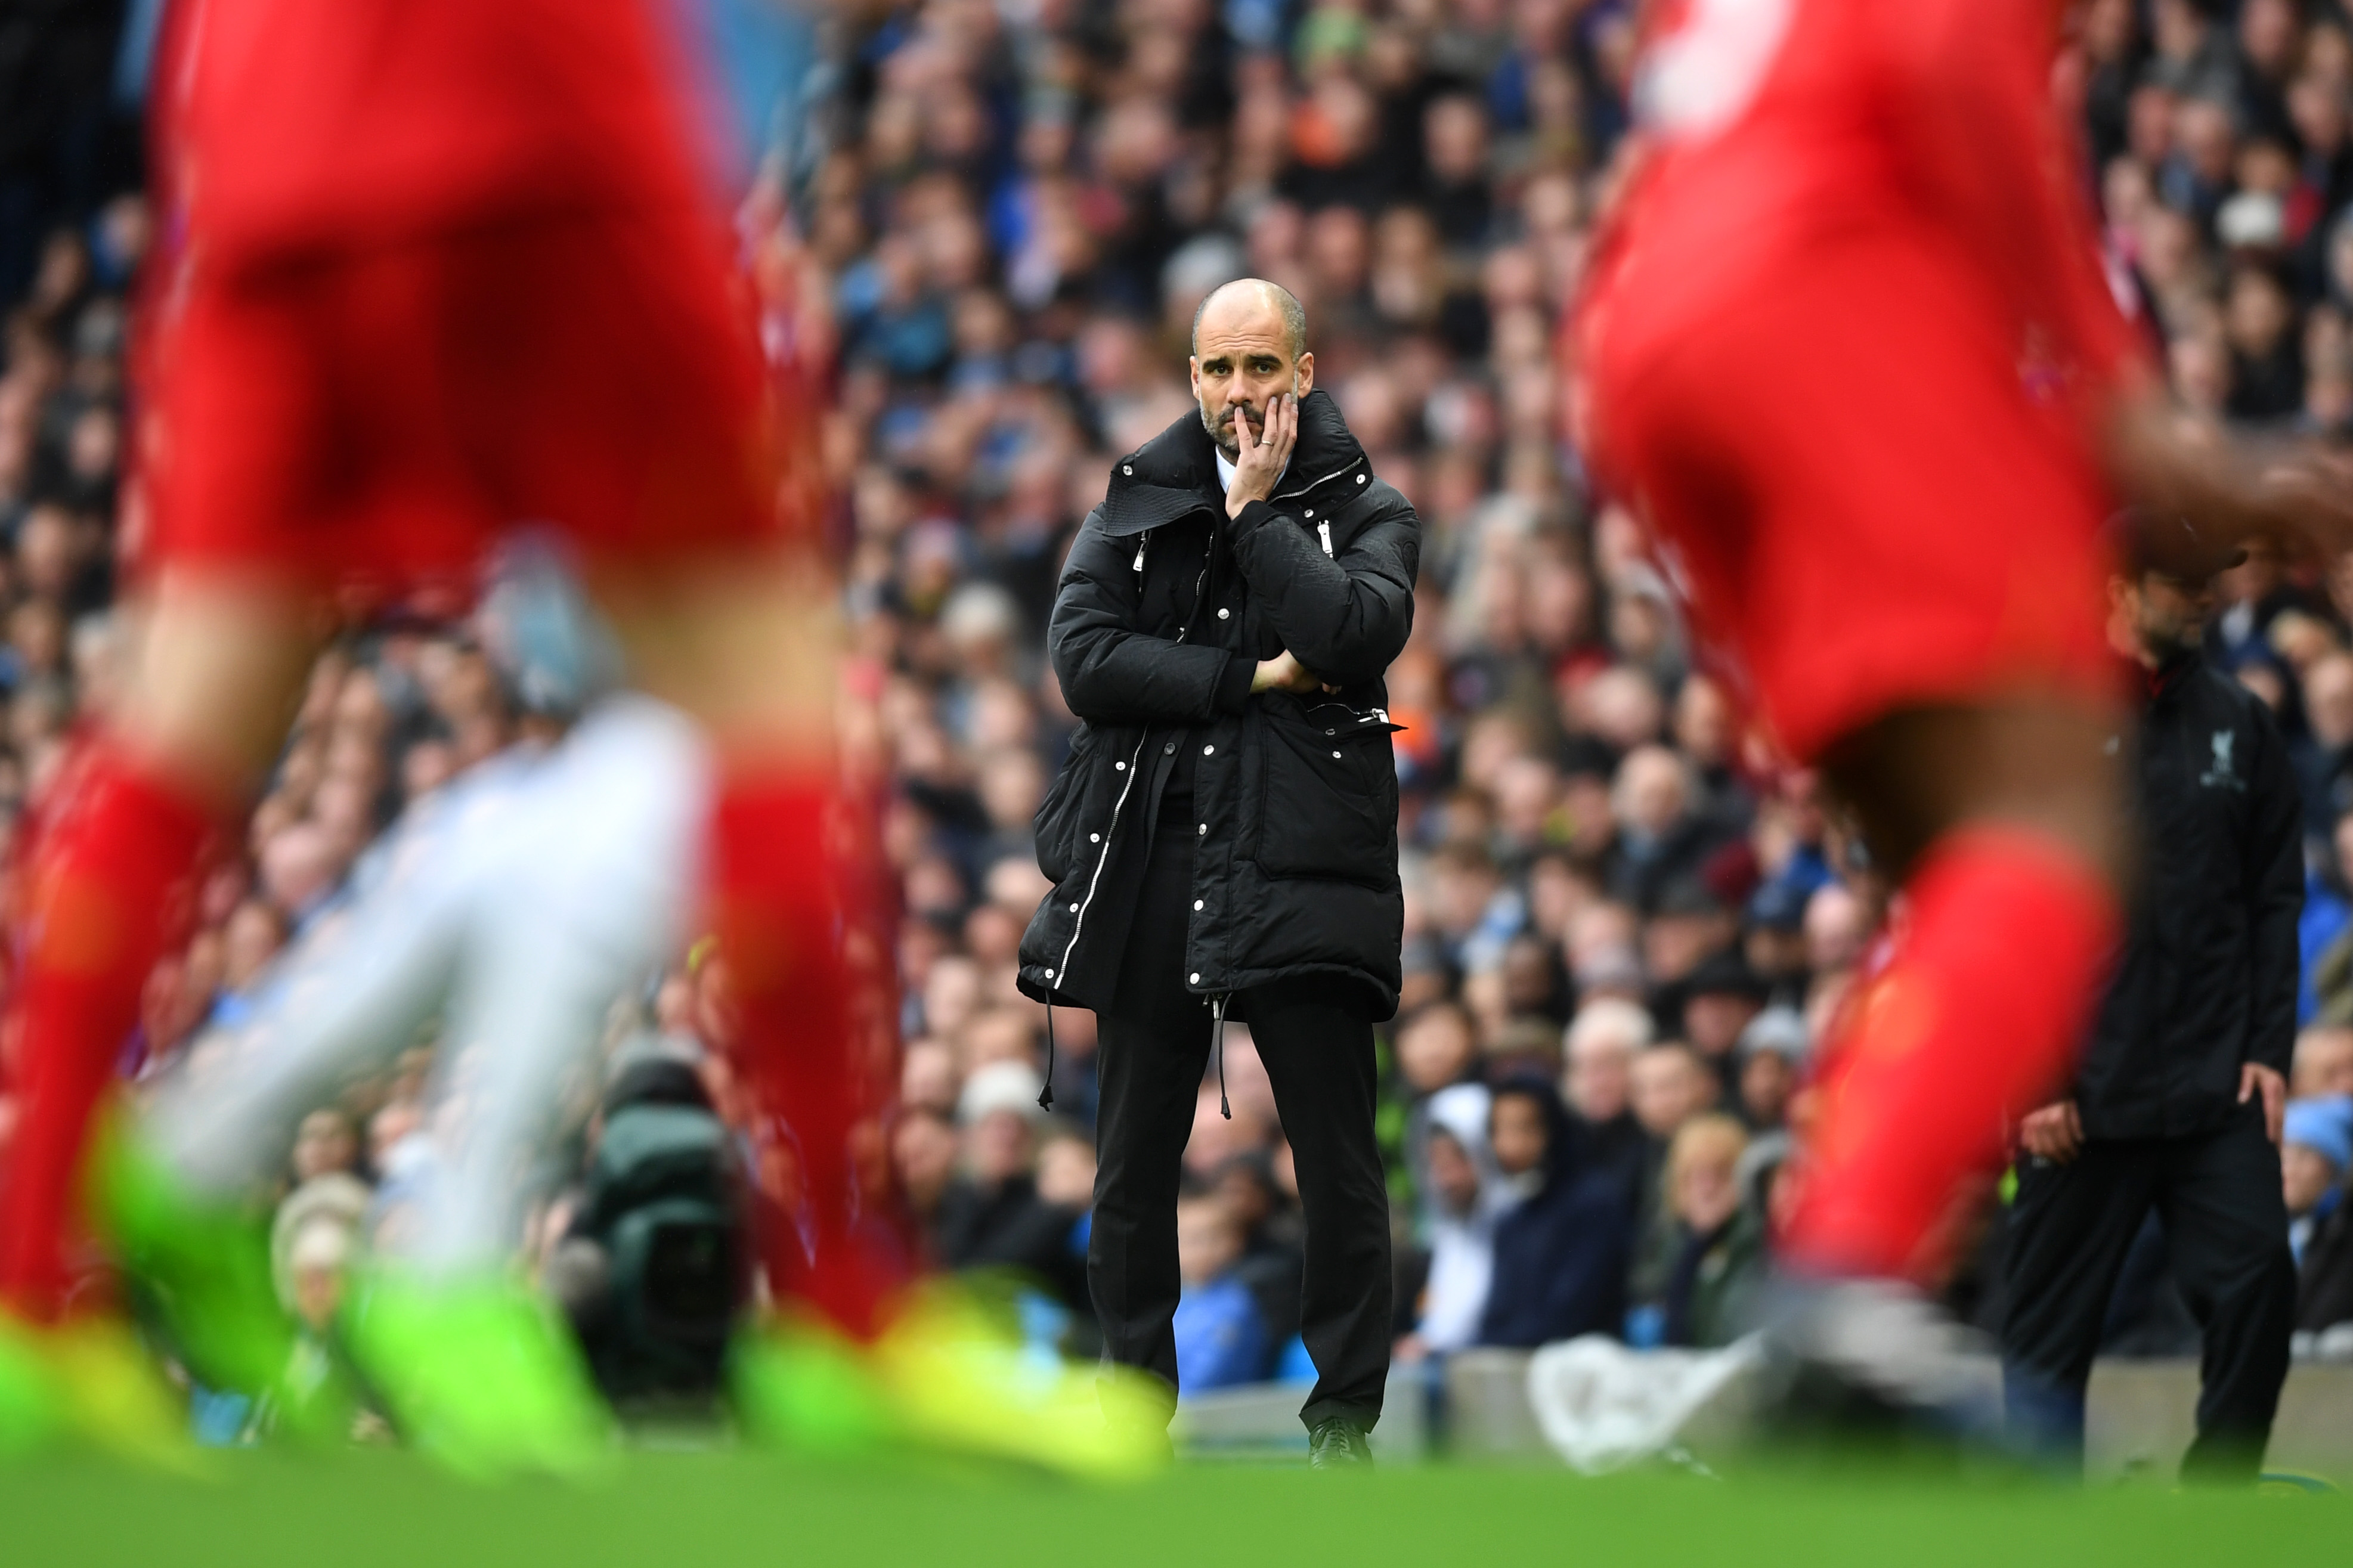 MANCHESTER, ENGLAND - MARCH 19:  Josep Guardiola, Manager of Manchester City looks on during the Premier League match between Manchester City and Liverpool at Etihad Stadium on March 19, 2017 in Manchester, England.  (Photo by Michael Regan/Getty Images)